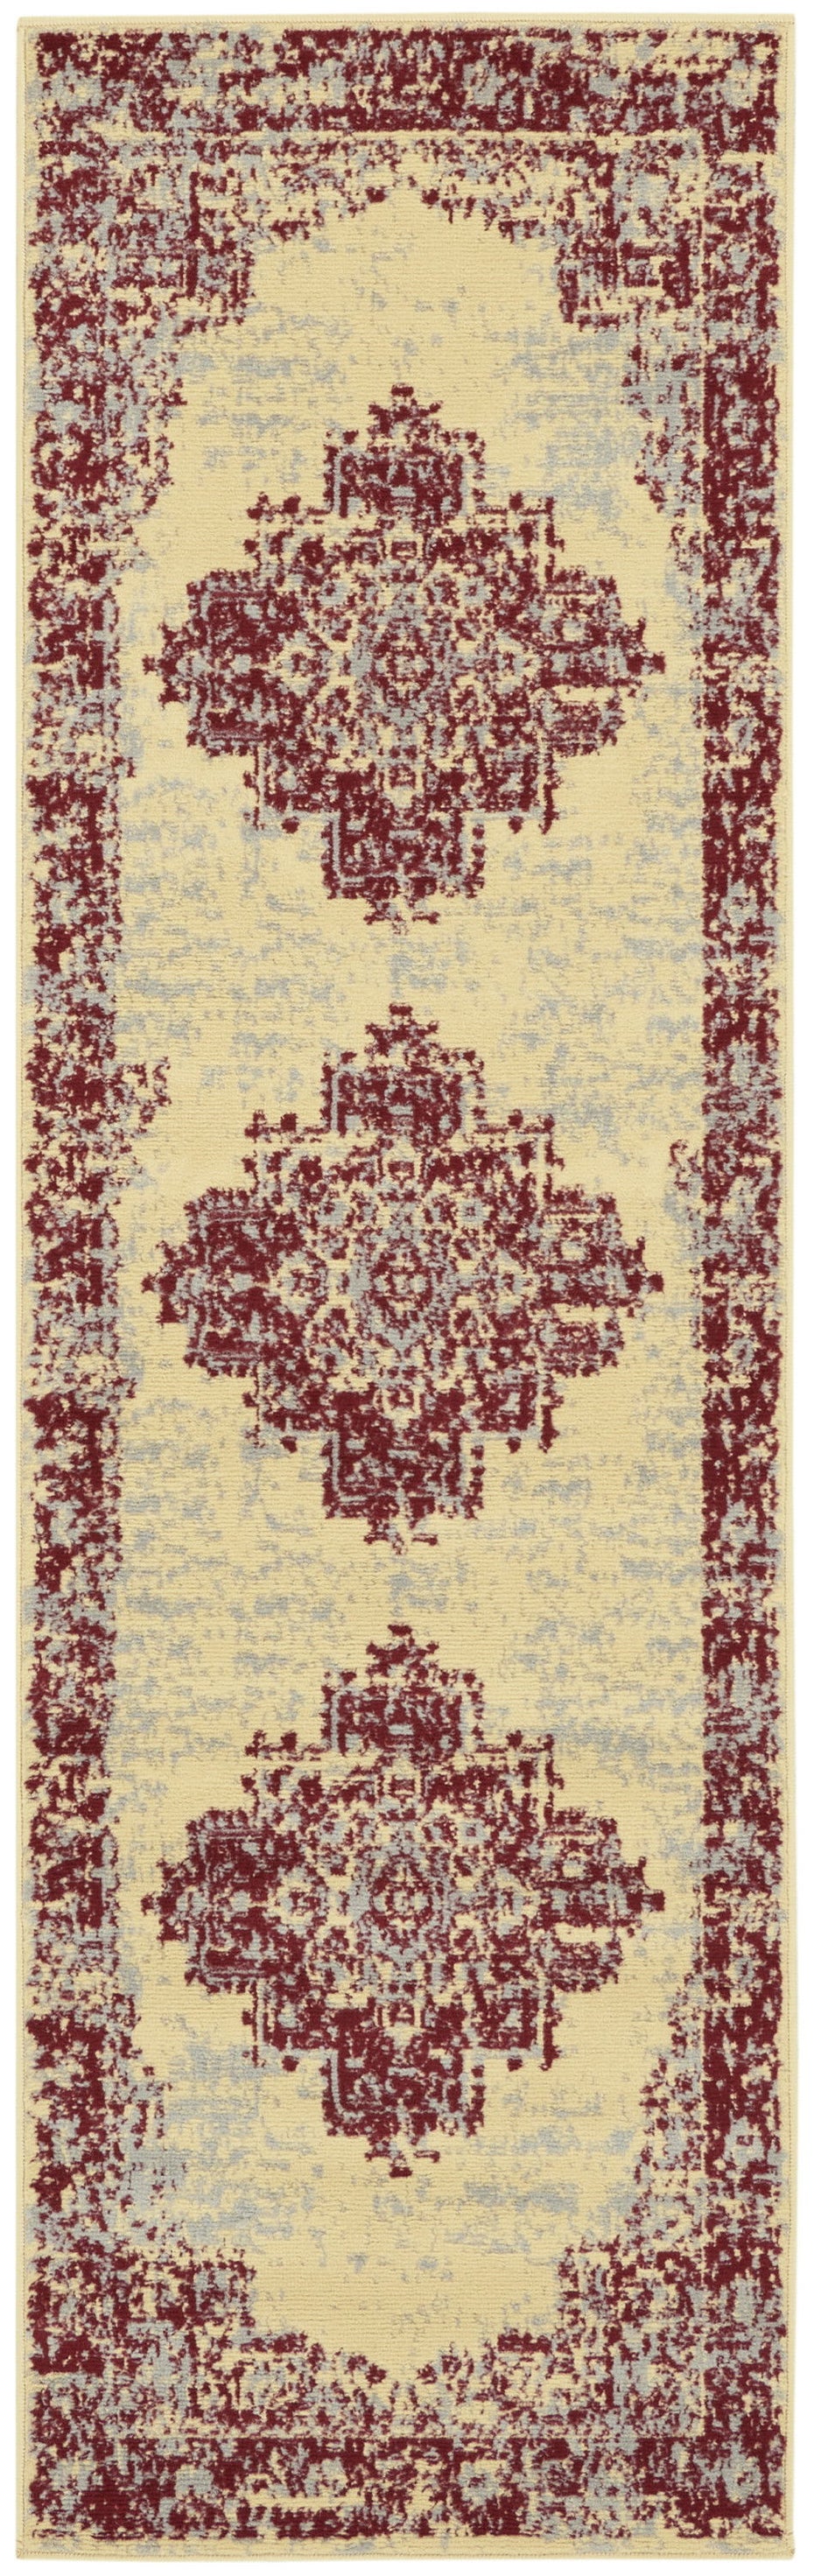 Damask Power Loom Runner Rug - Cream And Red - 8'